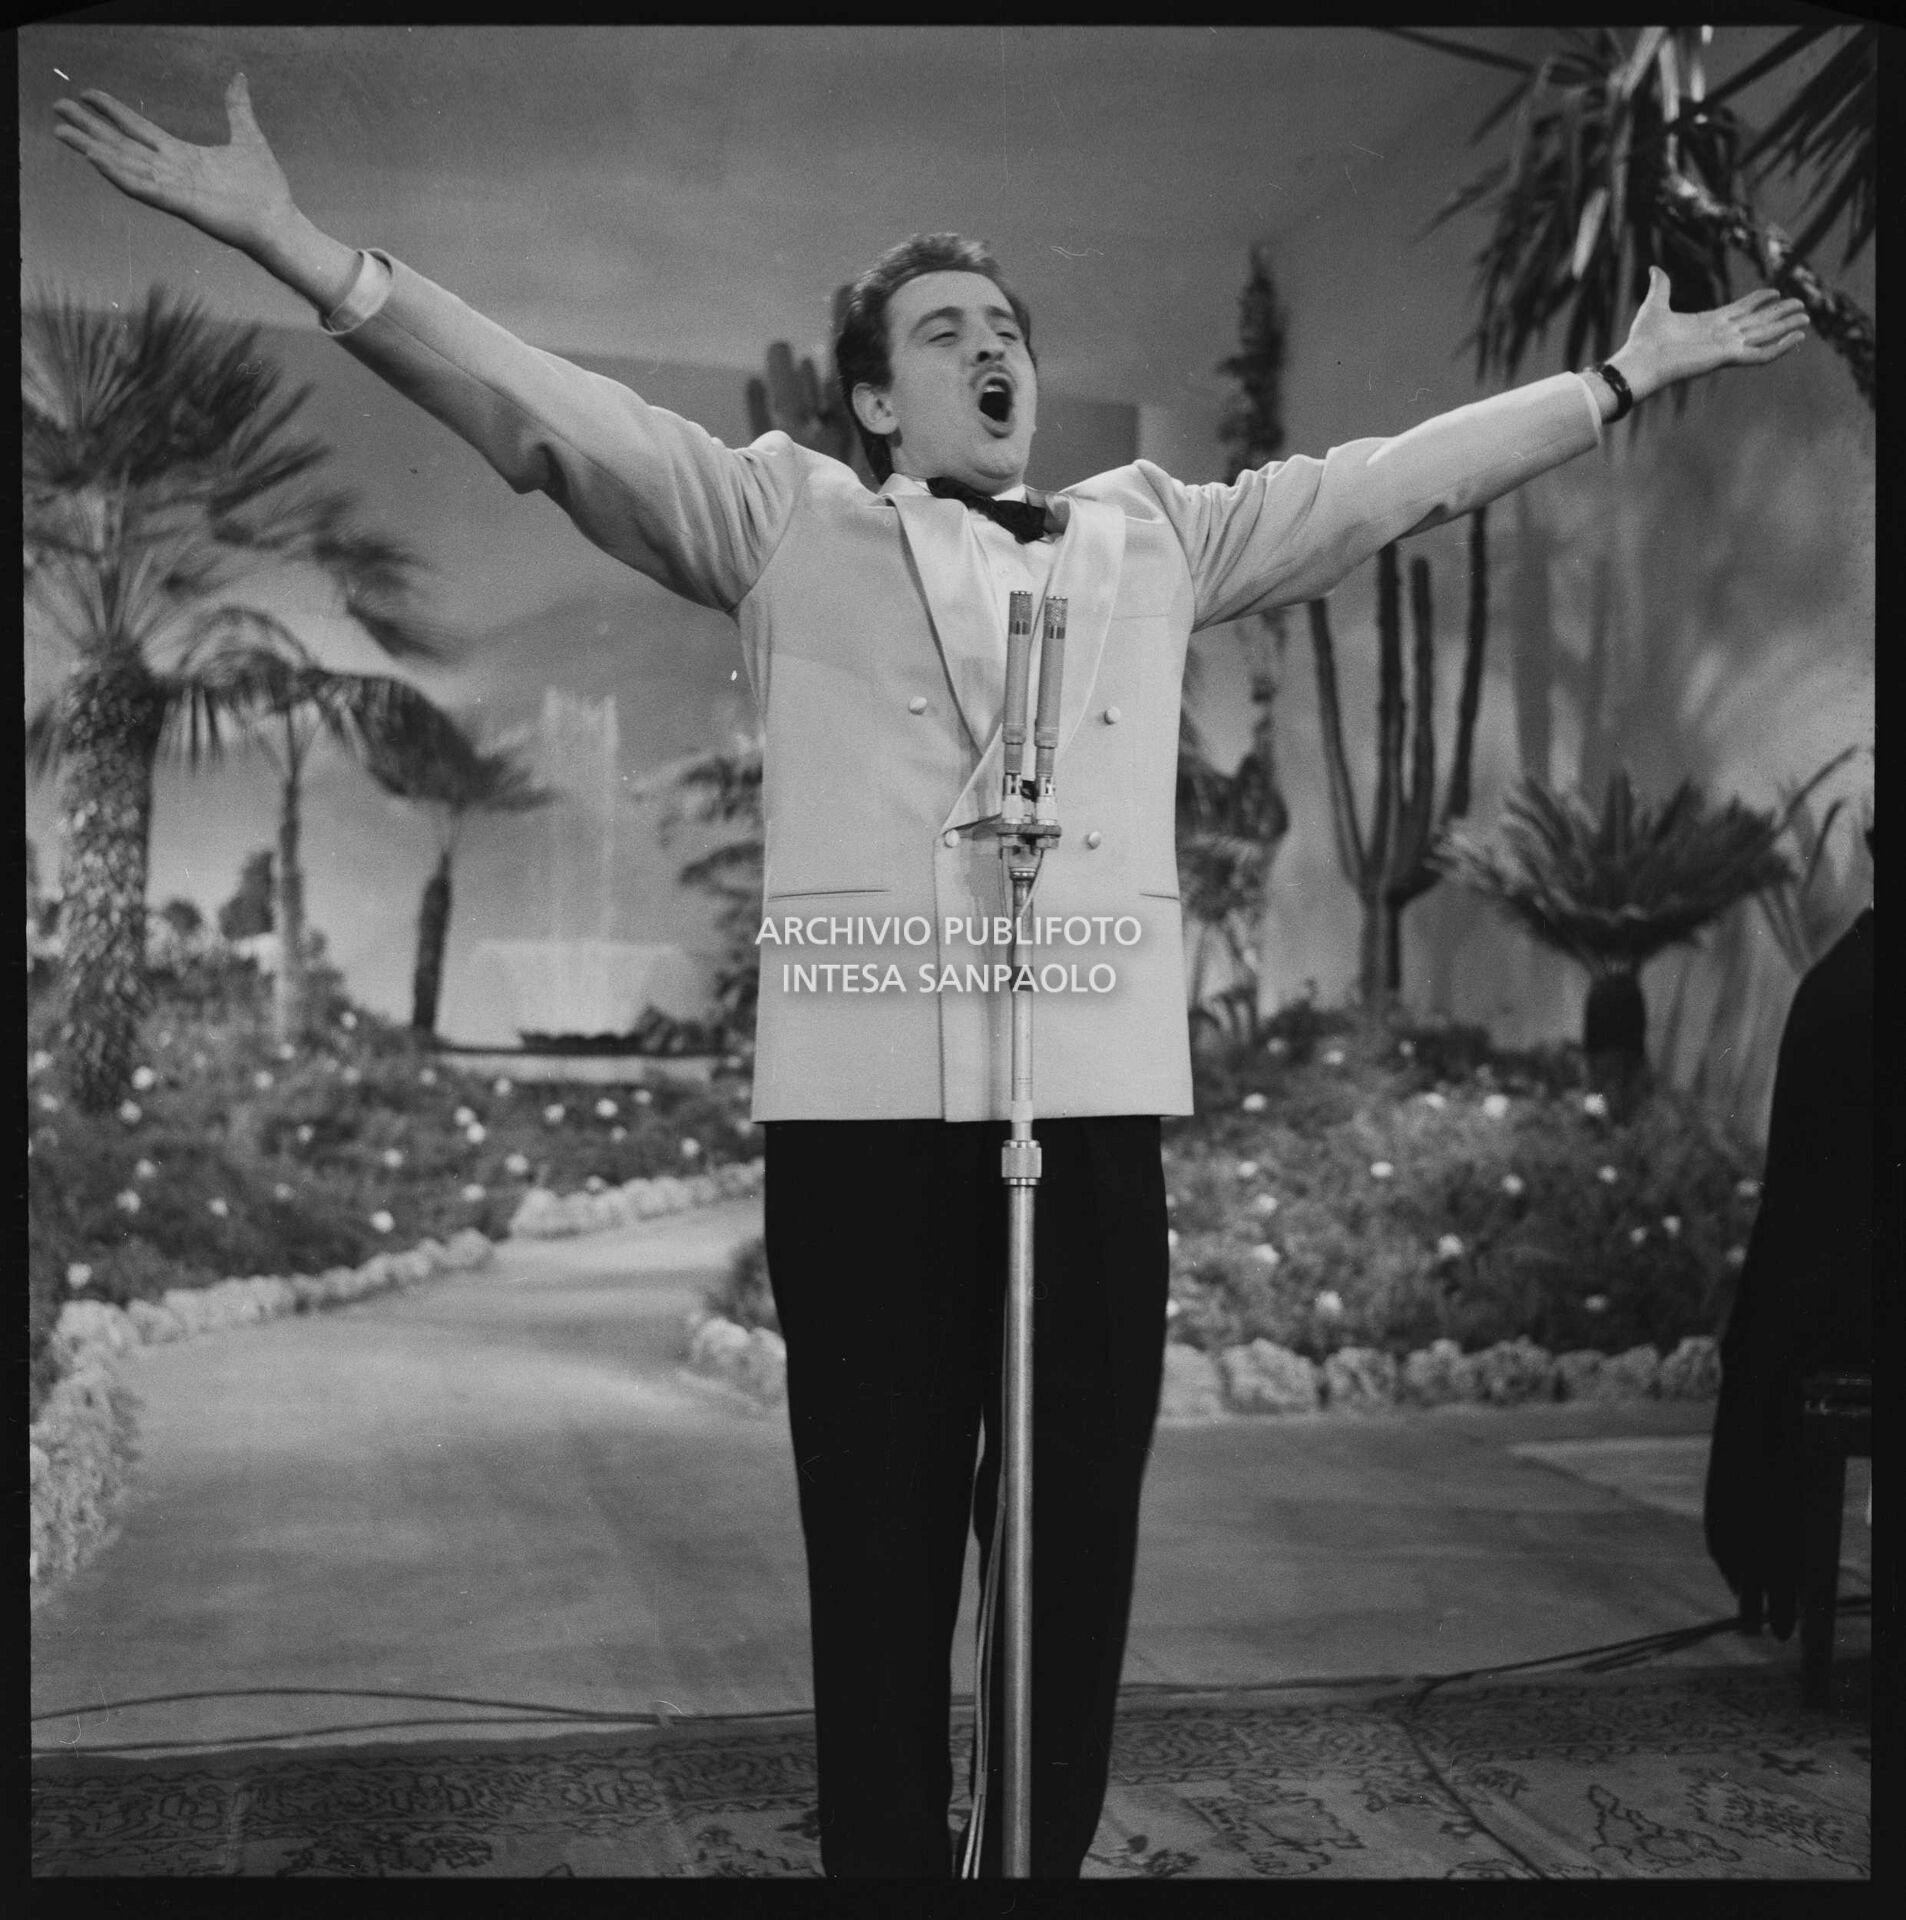 Domenico Modugno in the famous performance of the song "Nel blu dipinto di blu" on stage at the 8th Sanremo Festival